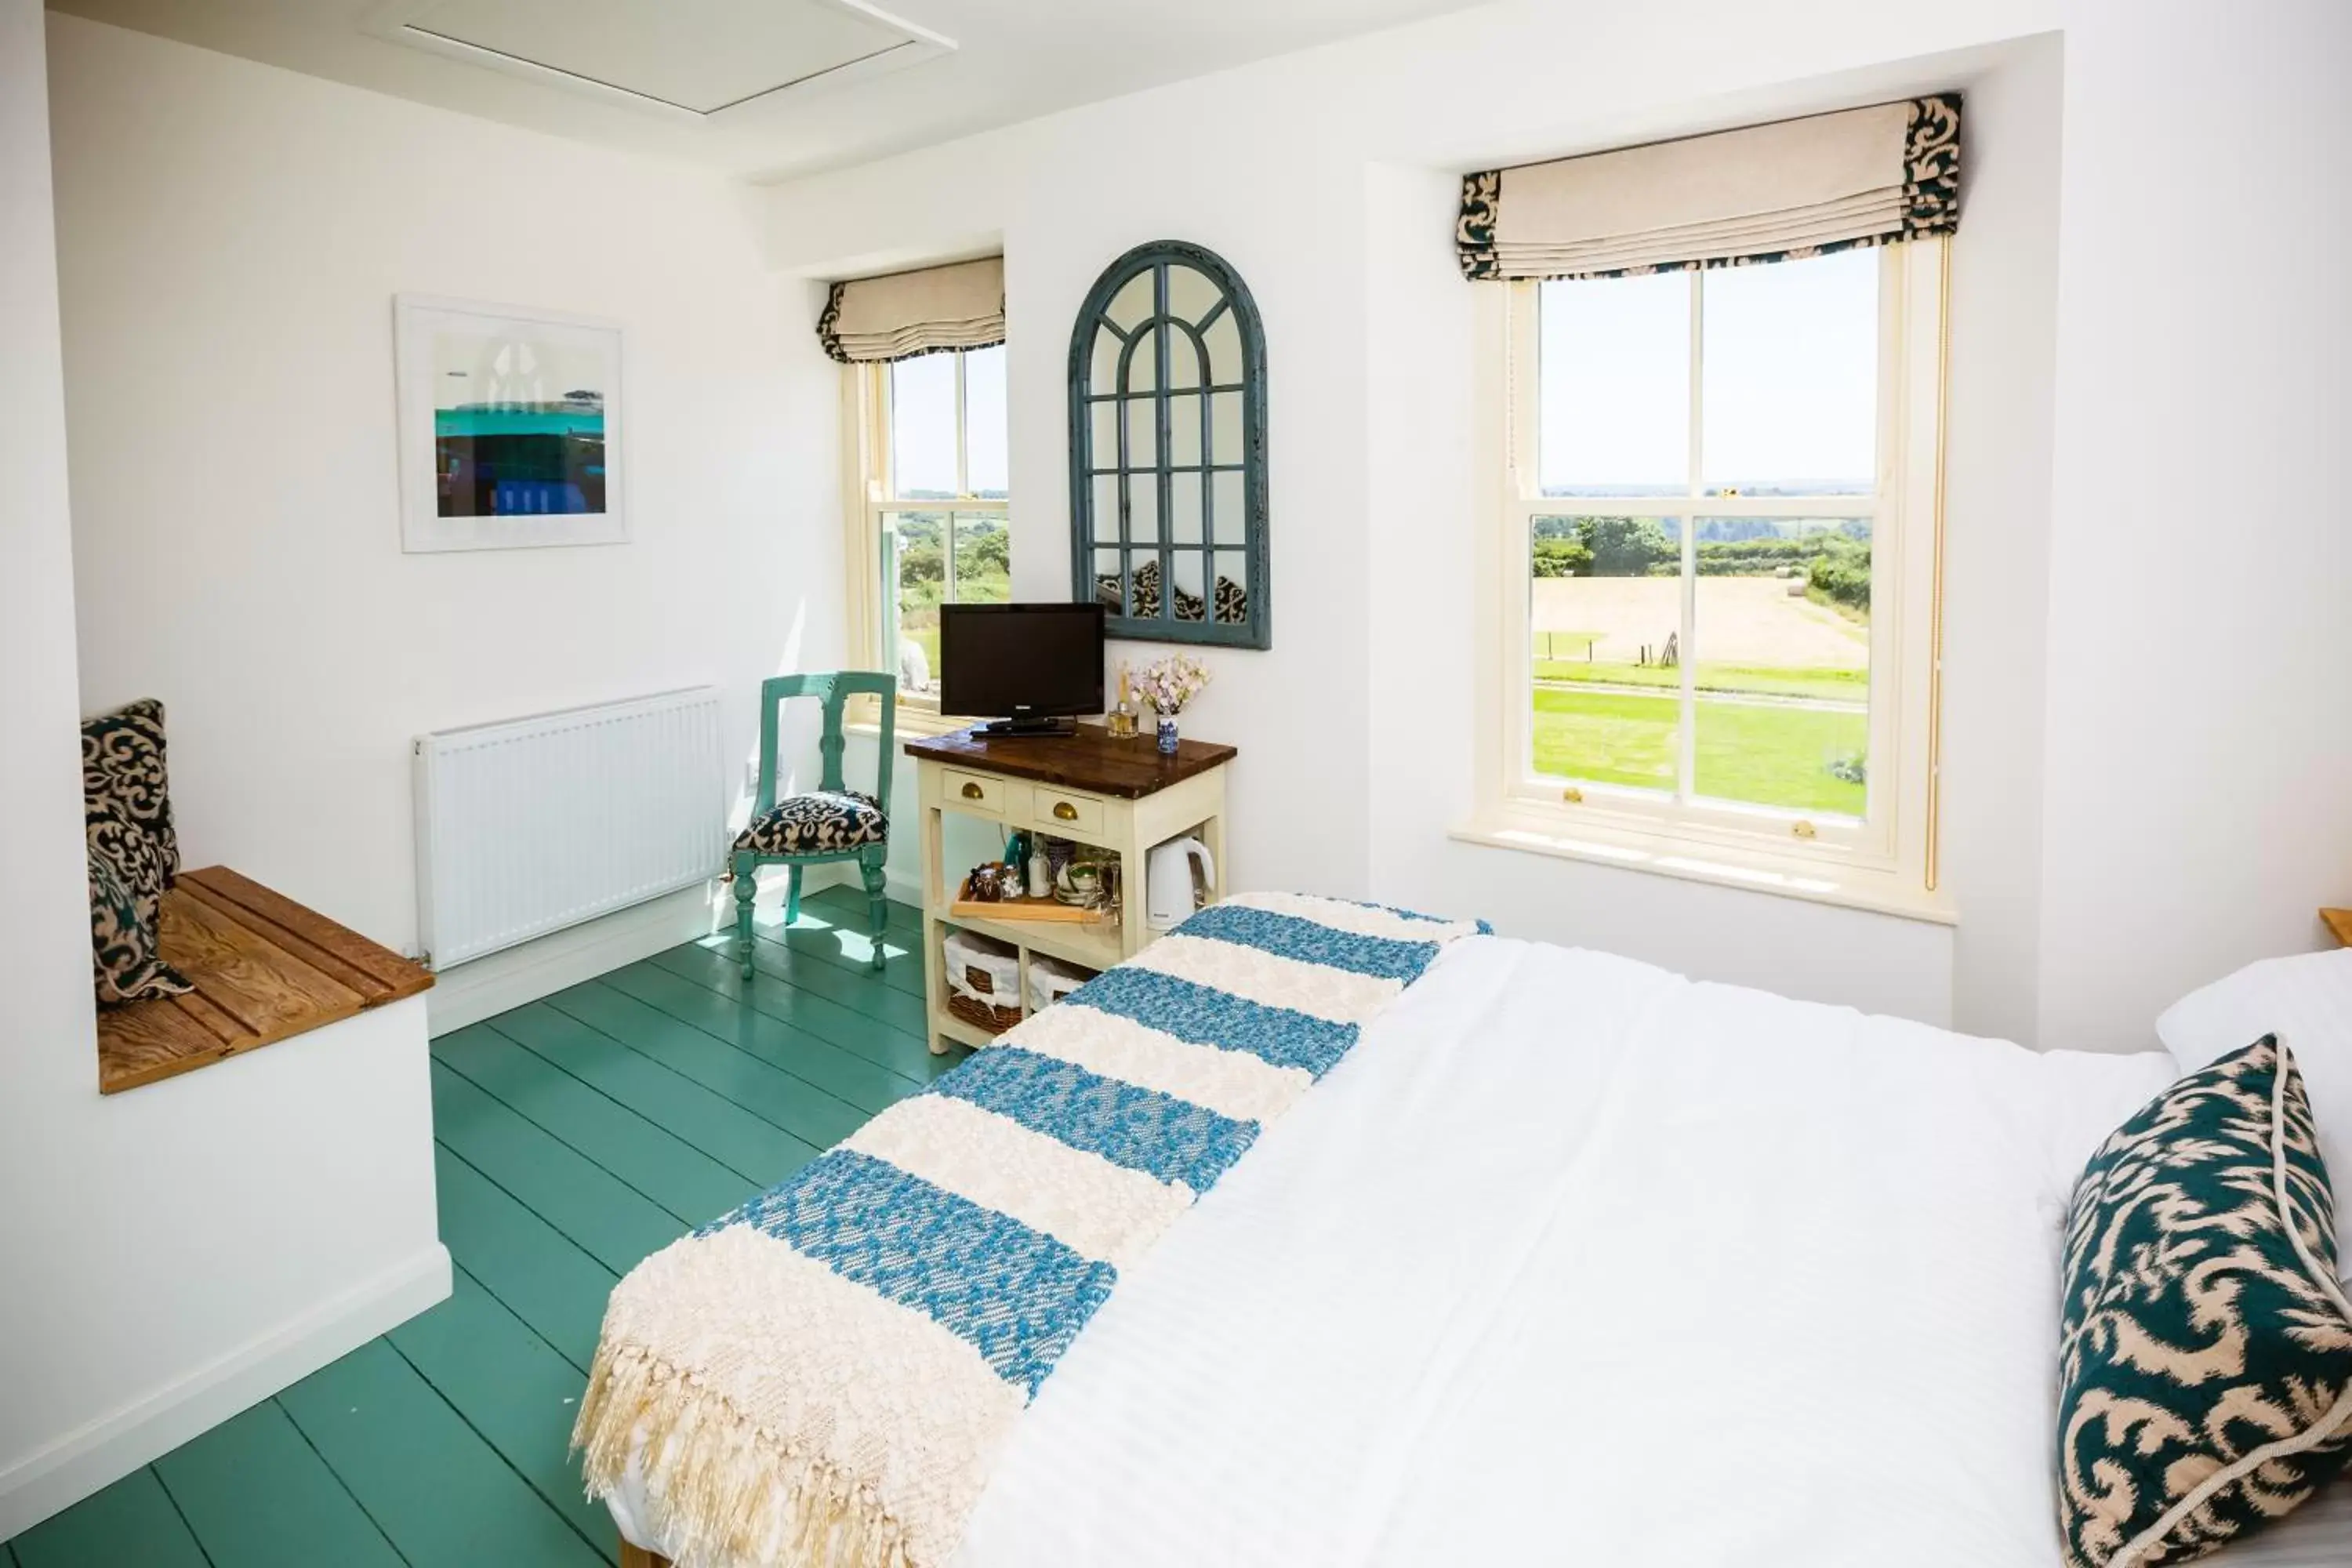 Double Room - Room 1 in Fig Tree House